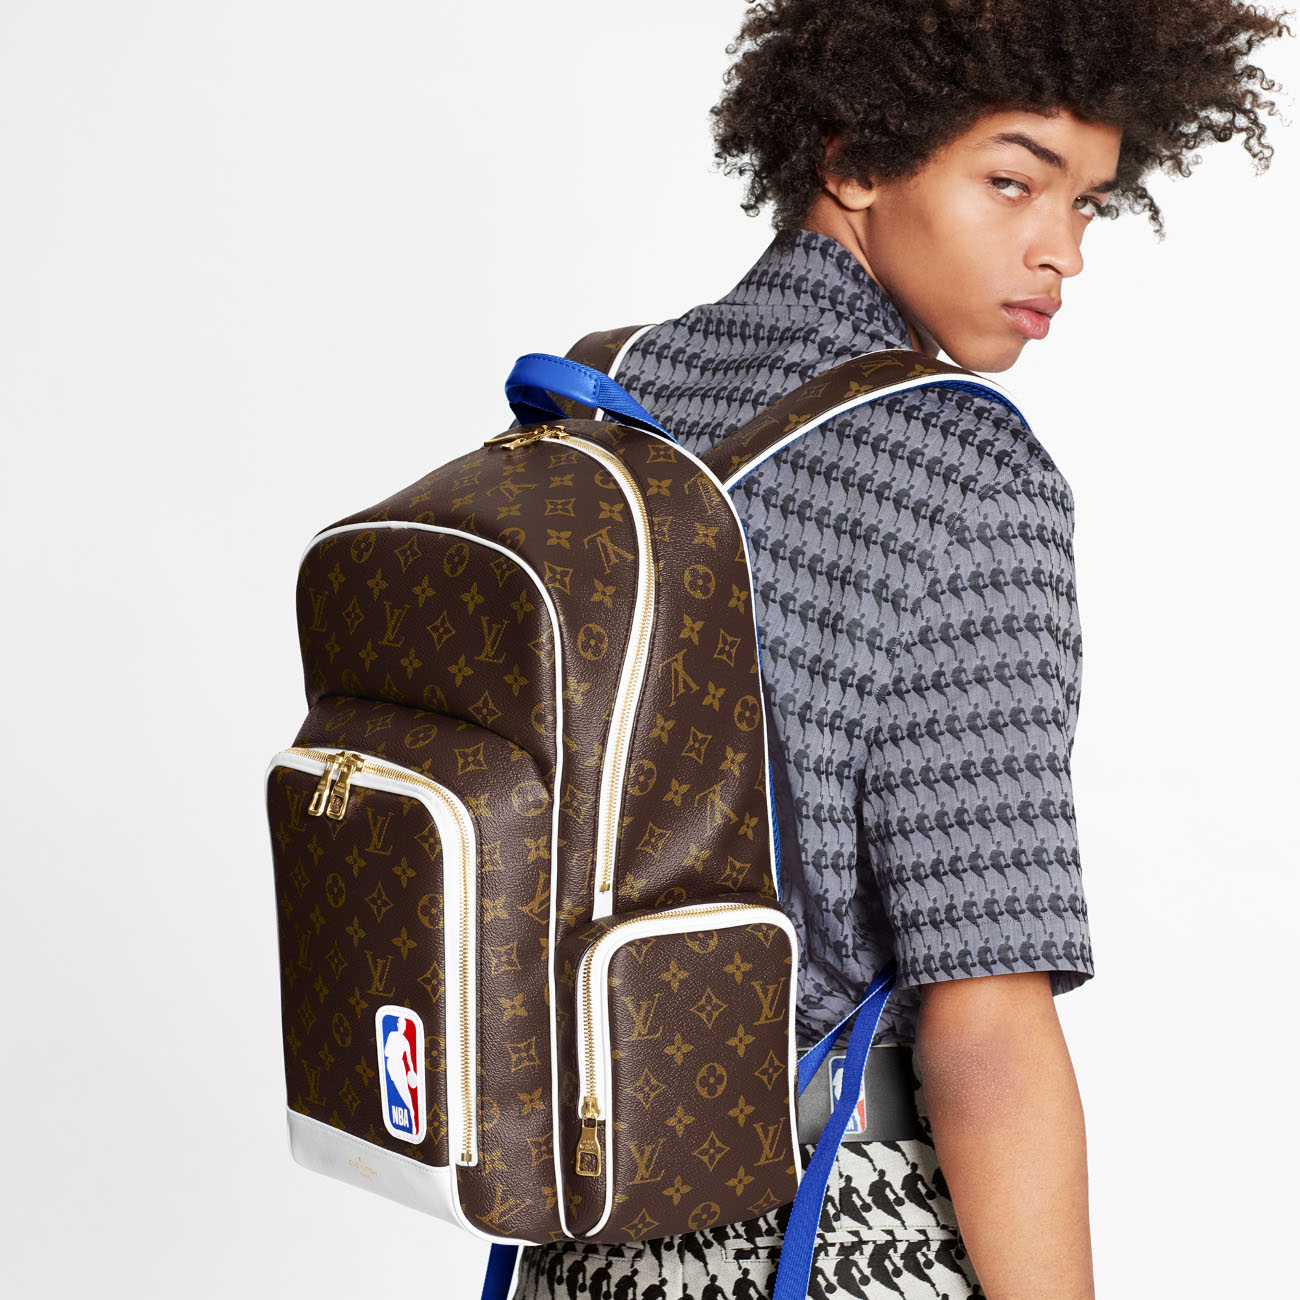 The complete Louis Vuitton x NBA Capsule Collection unveiled